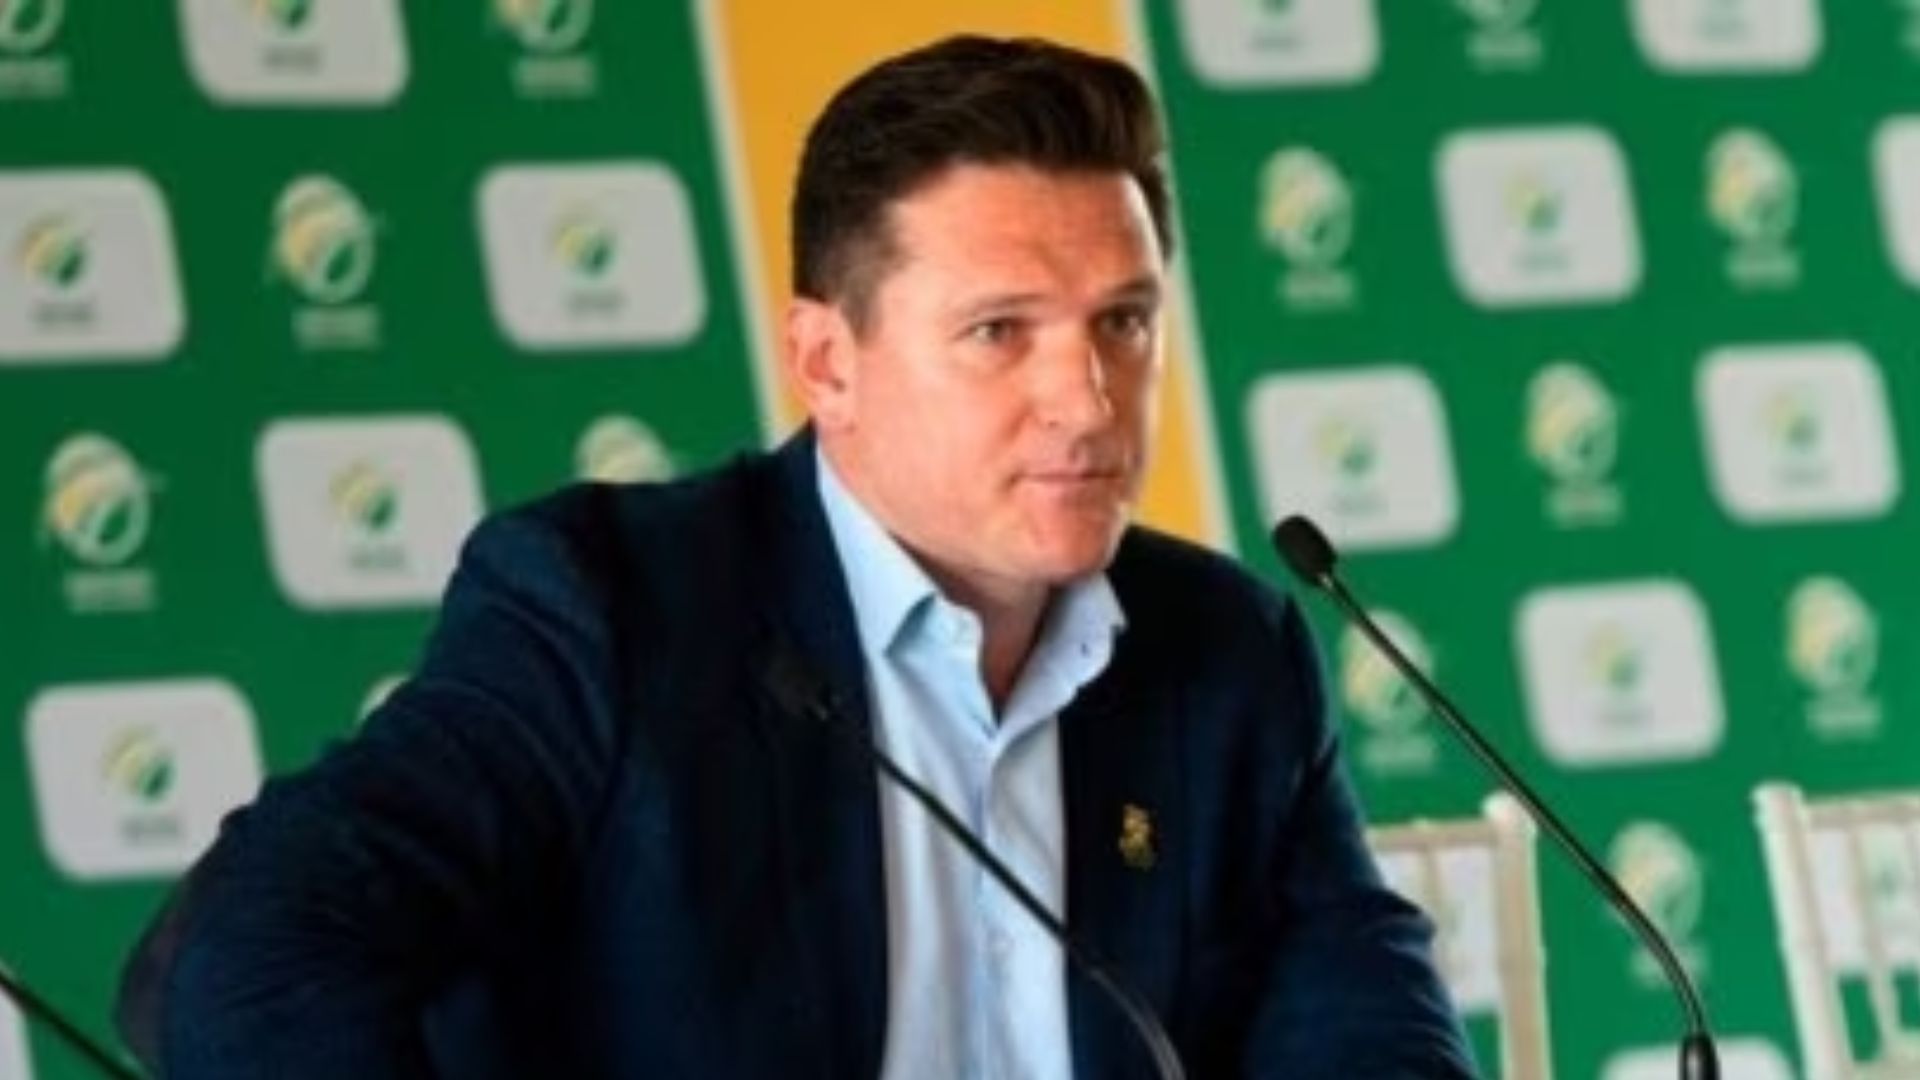 South Africa T20: Graeme Smith looking forward to seeing the country’s talent perform